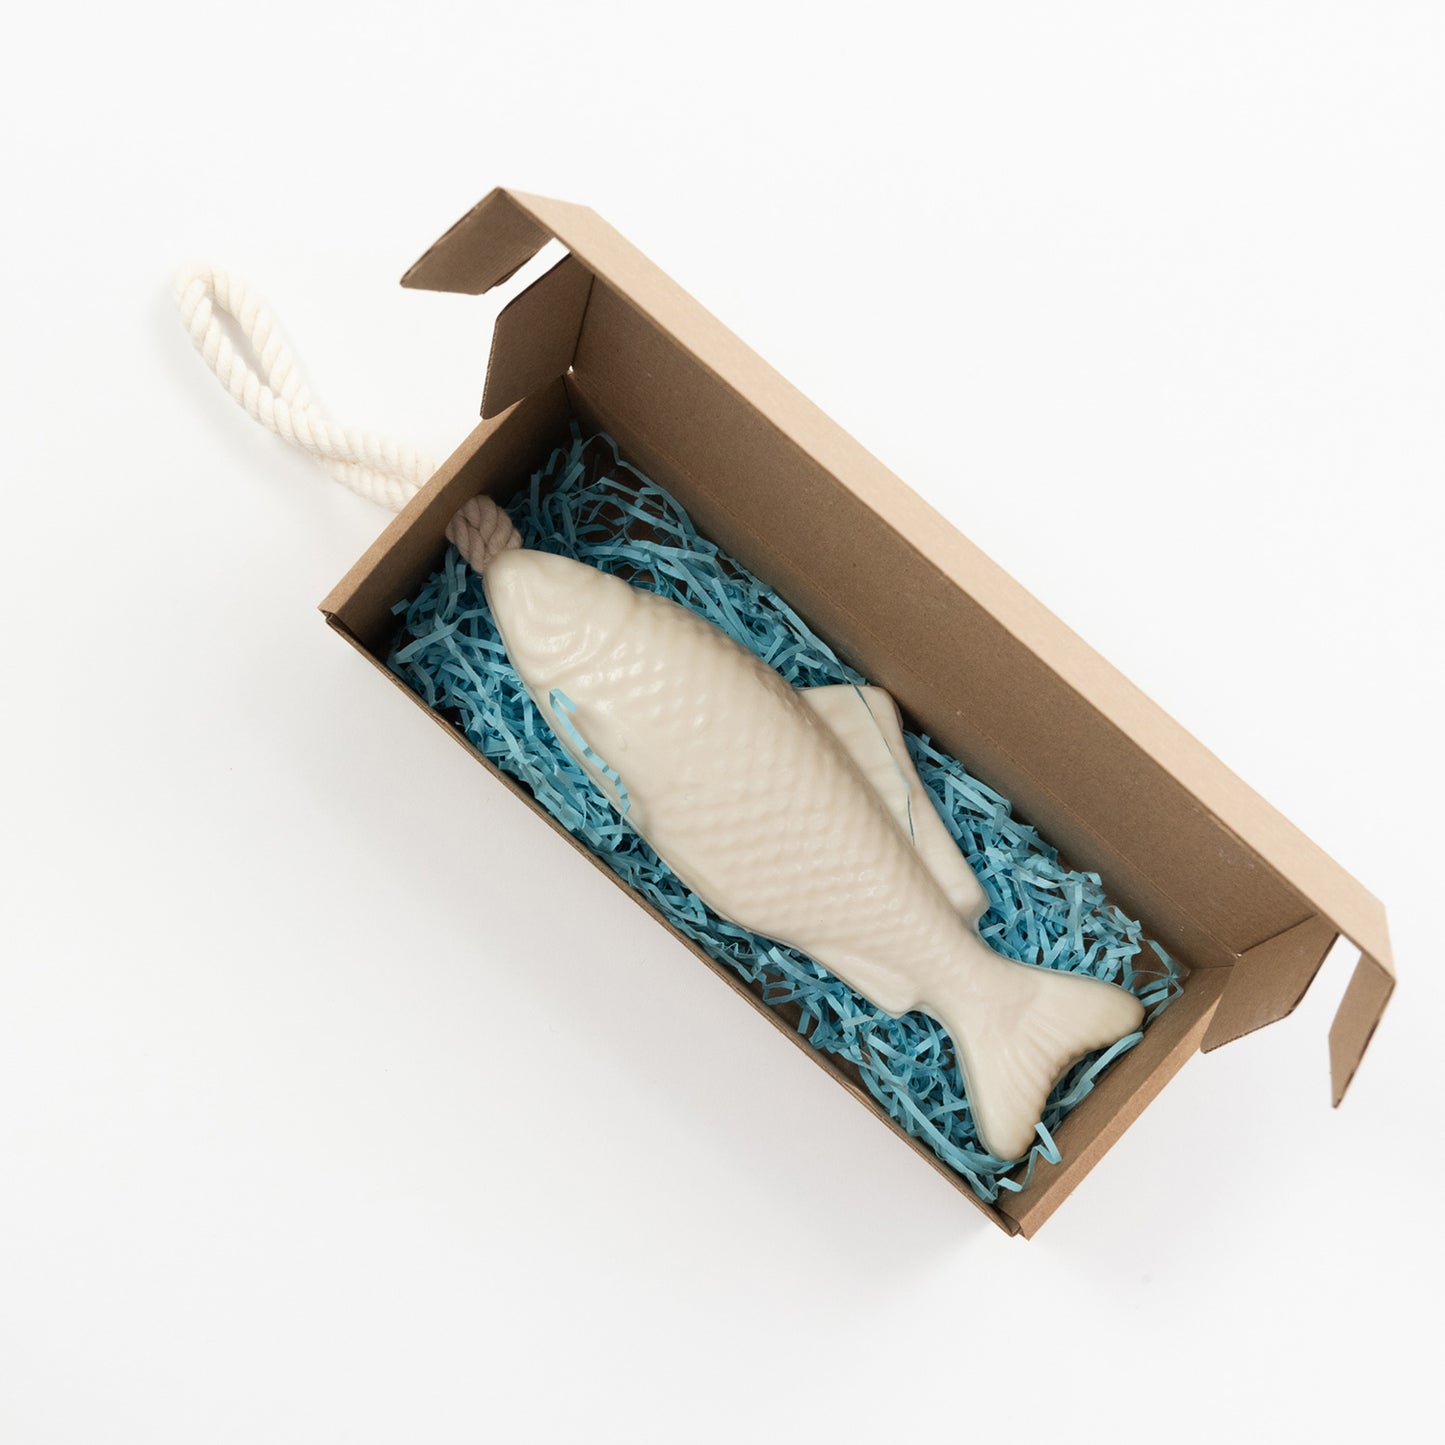 A white soap on a rope gift pictured in a cardboard gift box that contains blue tissue paper.